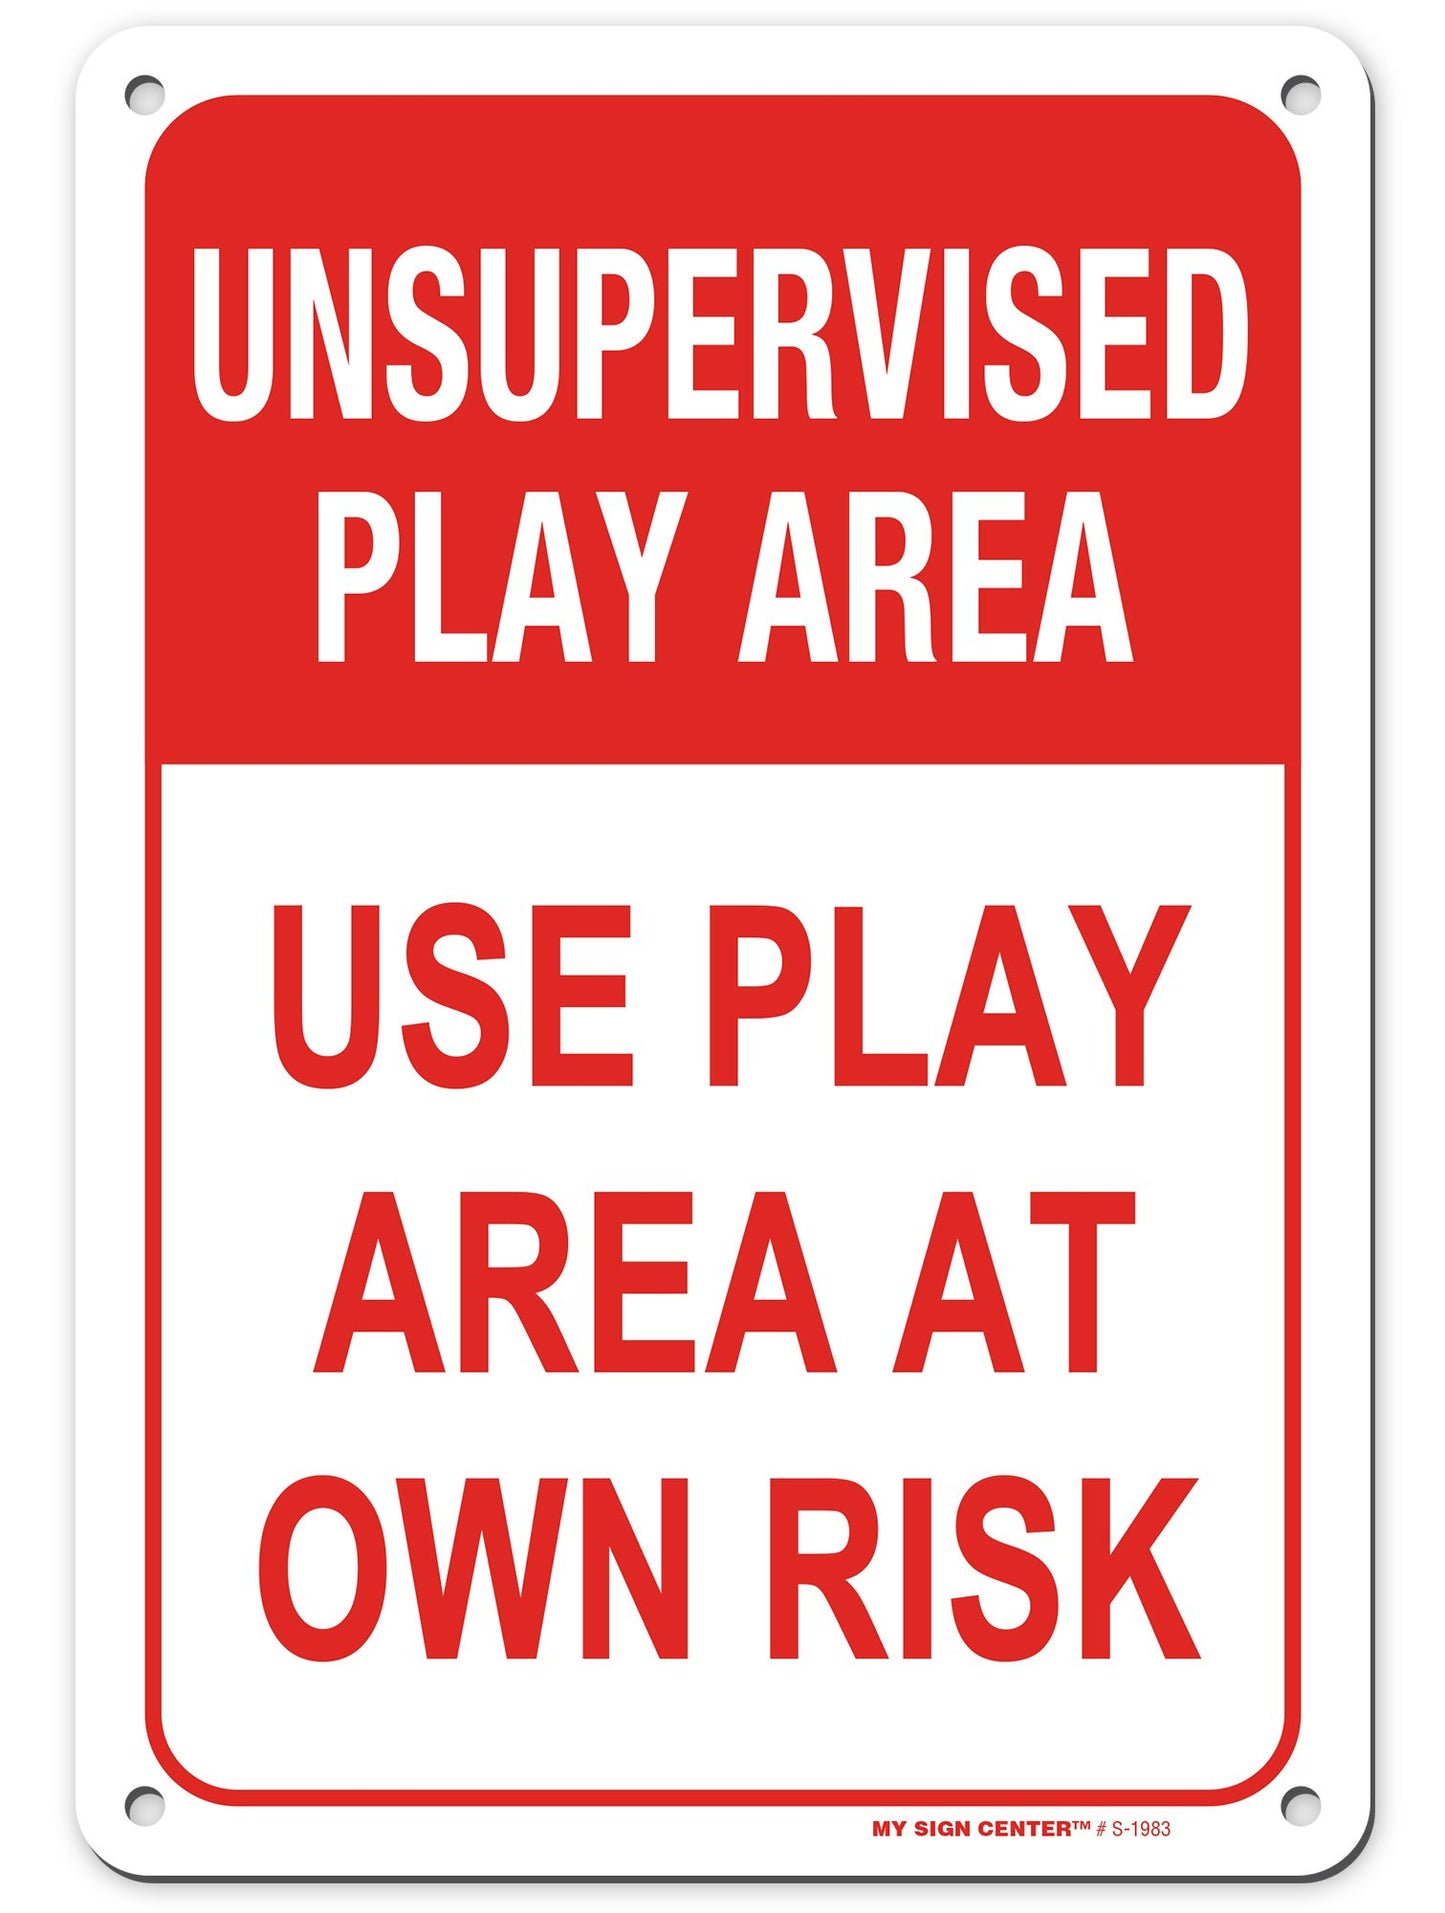 Unsupervised Play Area Use Play Area at Own Risk Sign By My Sign Center